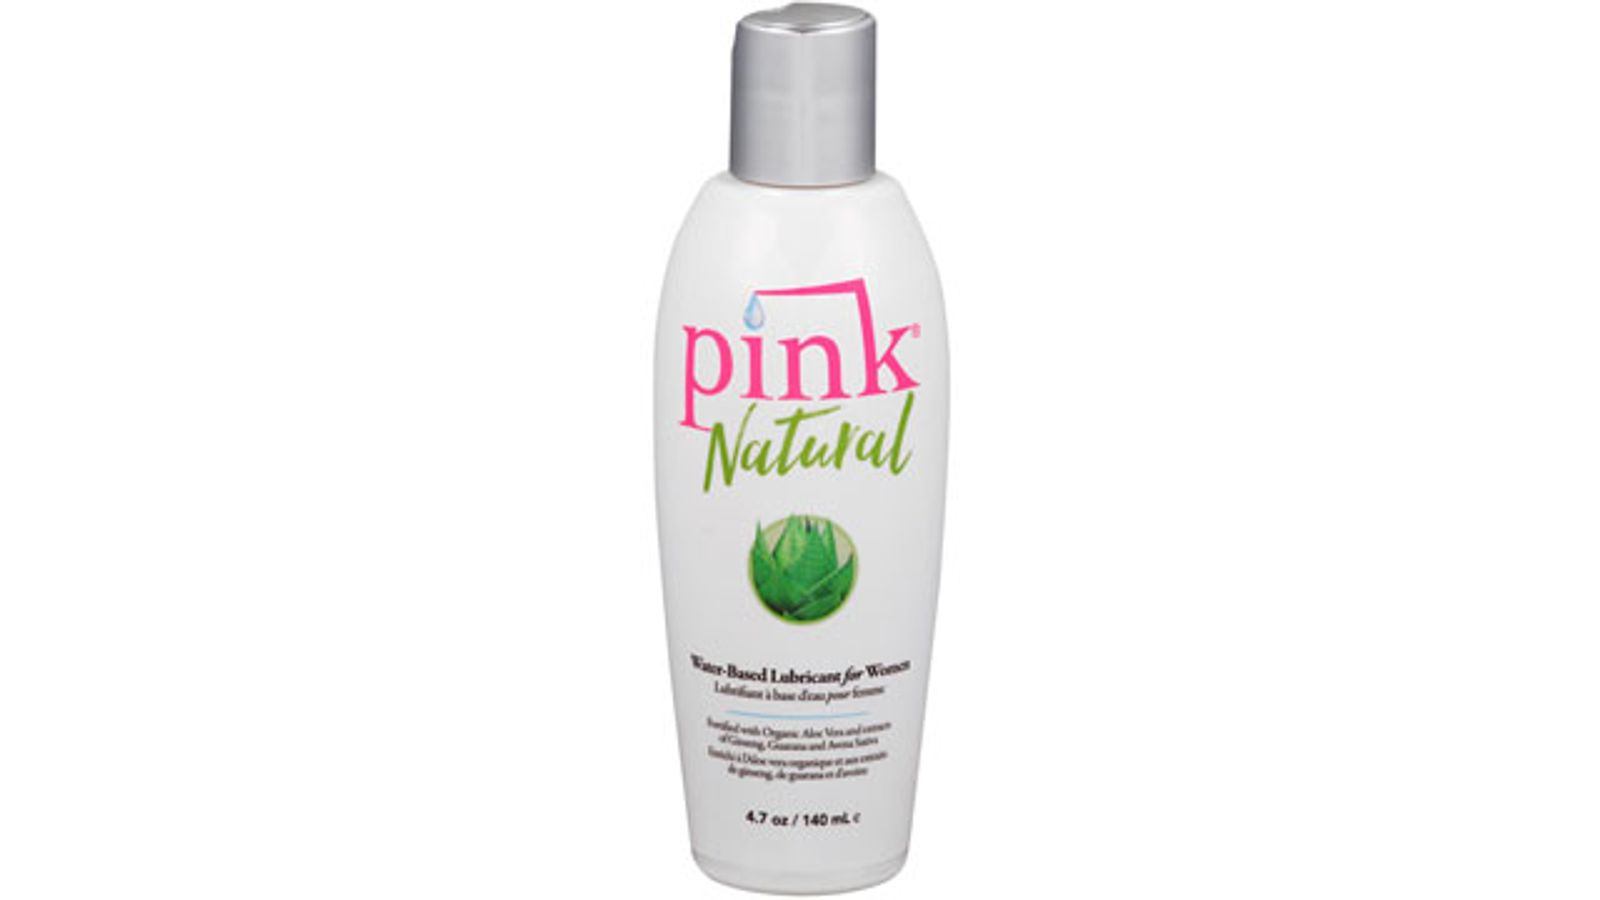 Empowered Products’ PINK Natural Water-Based Lube Sets A New Standard